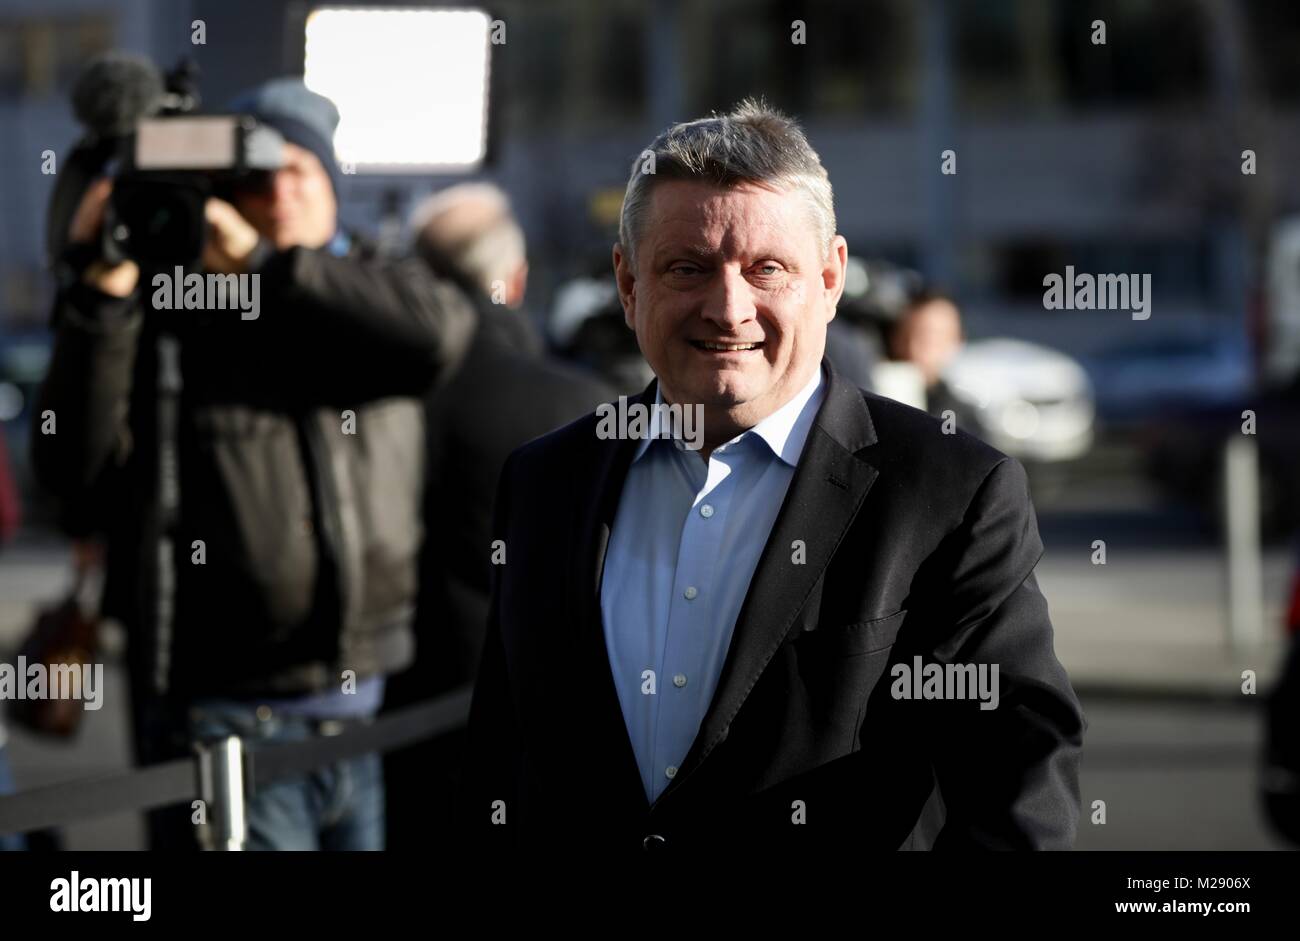 Berlin, Germany. 06th Feb, 2018. German Minister of Health, Hermann Groehe, of the Christian Democratic Union (CDU) arrives at the coalition negotiations of the CDU, Christian Social Union (CSU) and the Social Democratic Party (SPD) in front of the CDU's party headquarter, the Konrad-Adenauer-Haus, in Berlin, Germany, 06 February 2018. Credit: Kay Nietfeld/dpa/Alamy Live News Stock Photo